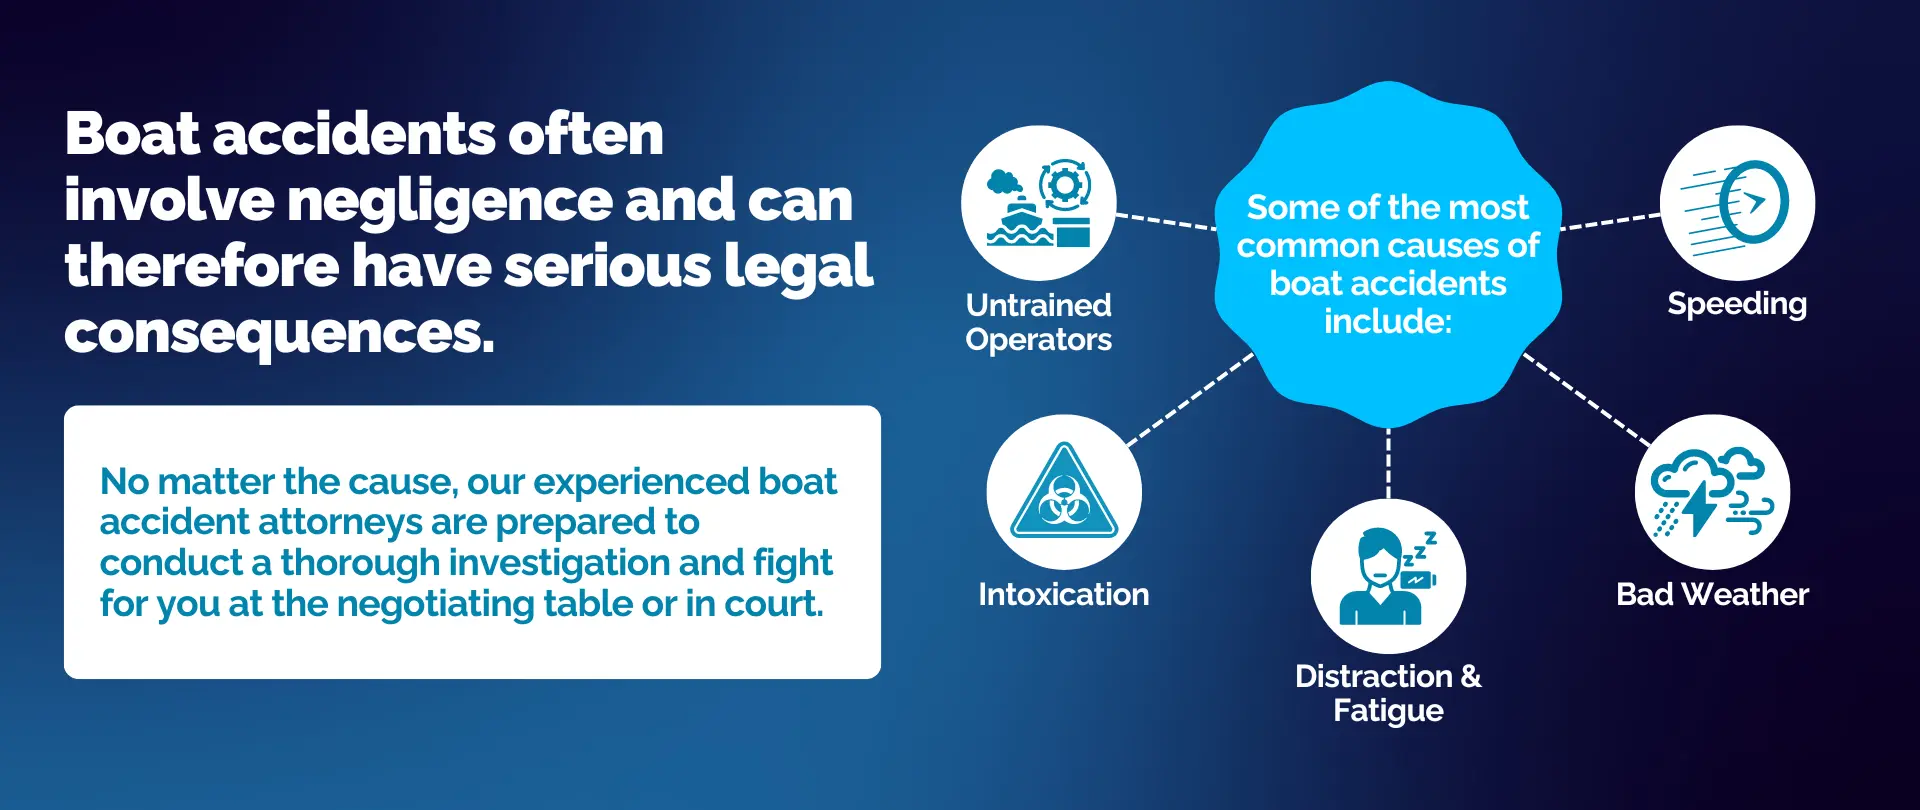 An infographic showing some common causes of boat accidents. These include untrained operators, intoxication, distraction & fatigue, bad weather, and speeding